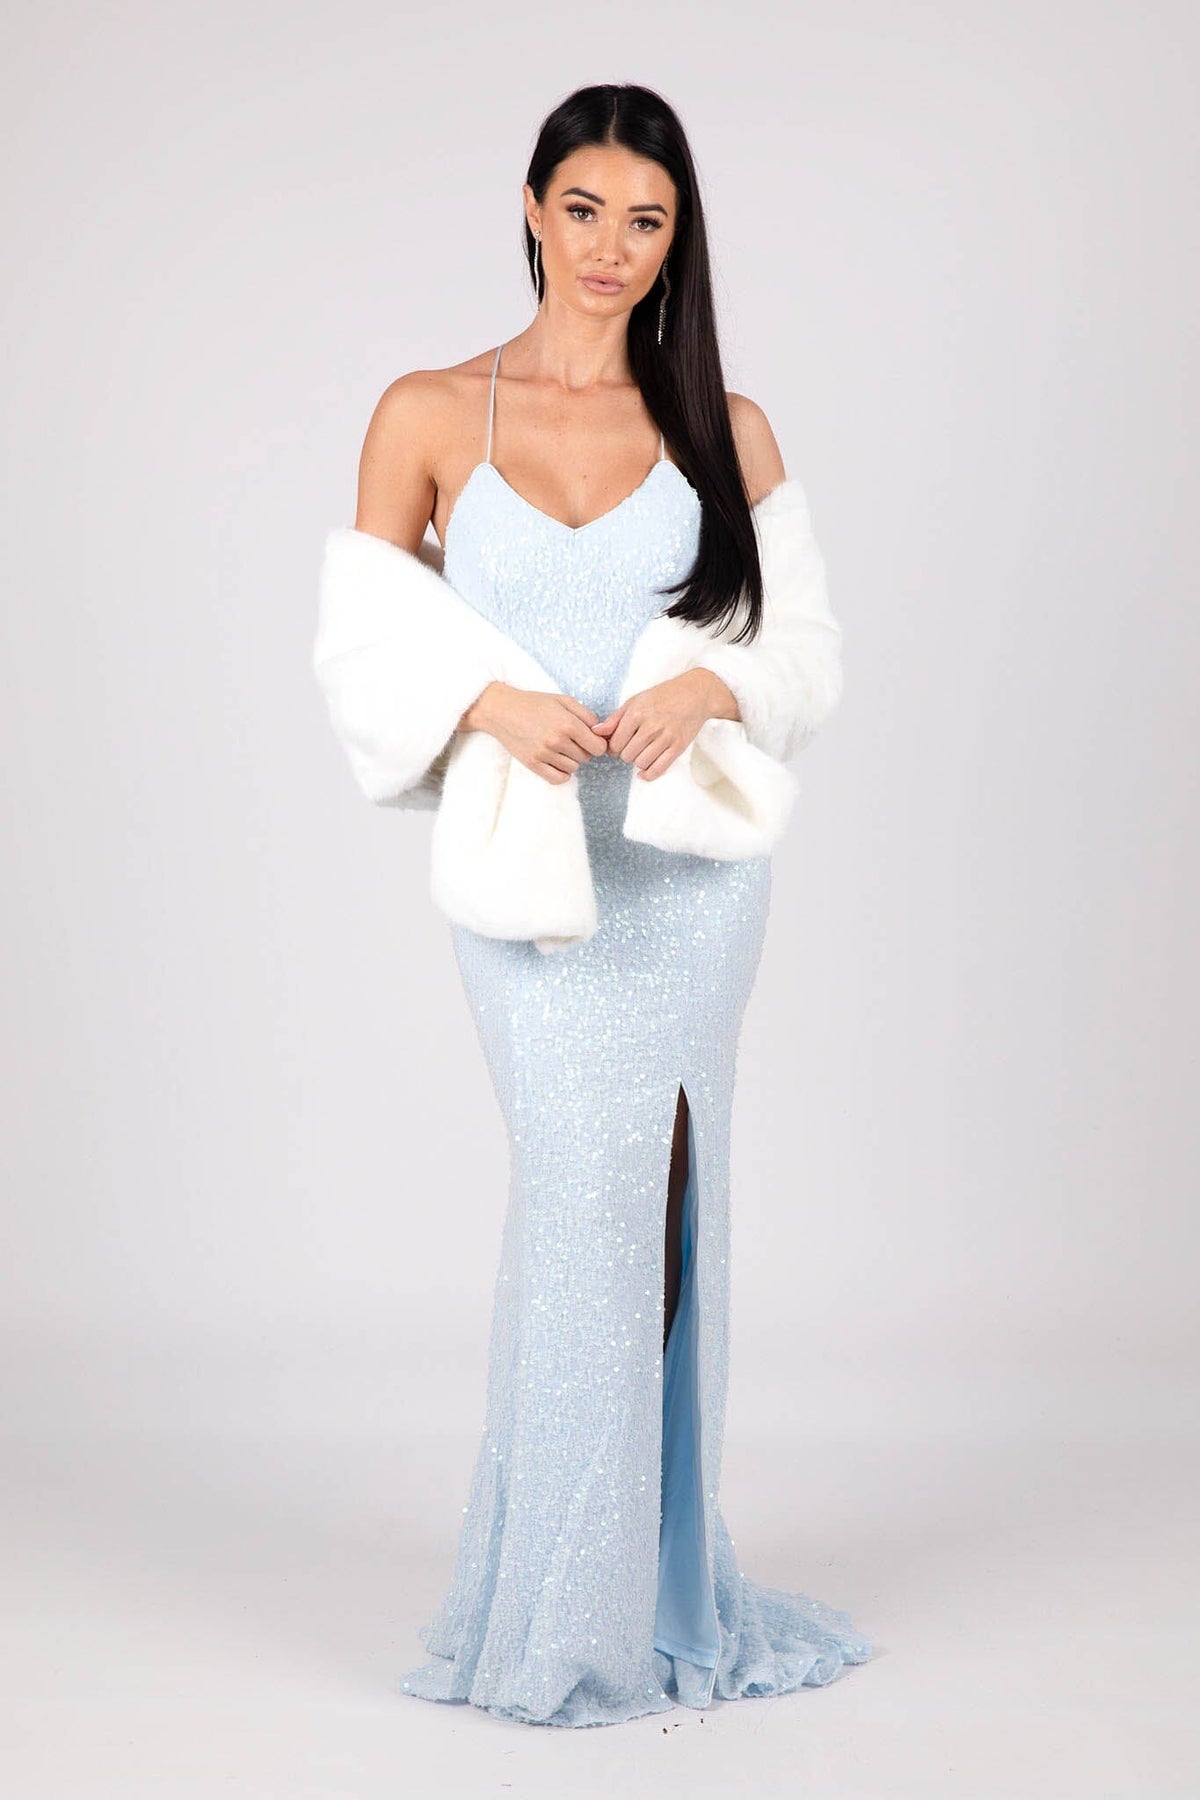 White Faux Fur Shawl worn with Floor Length Evening Gown